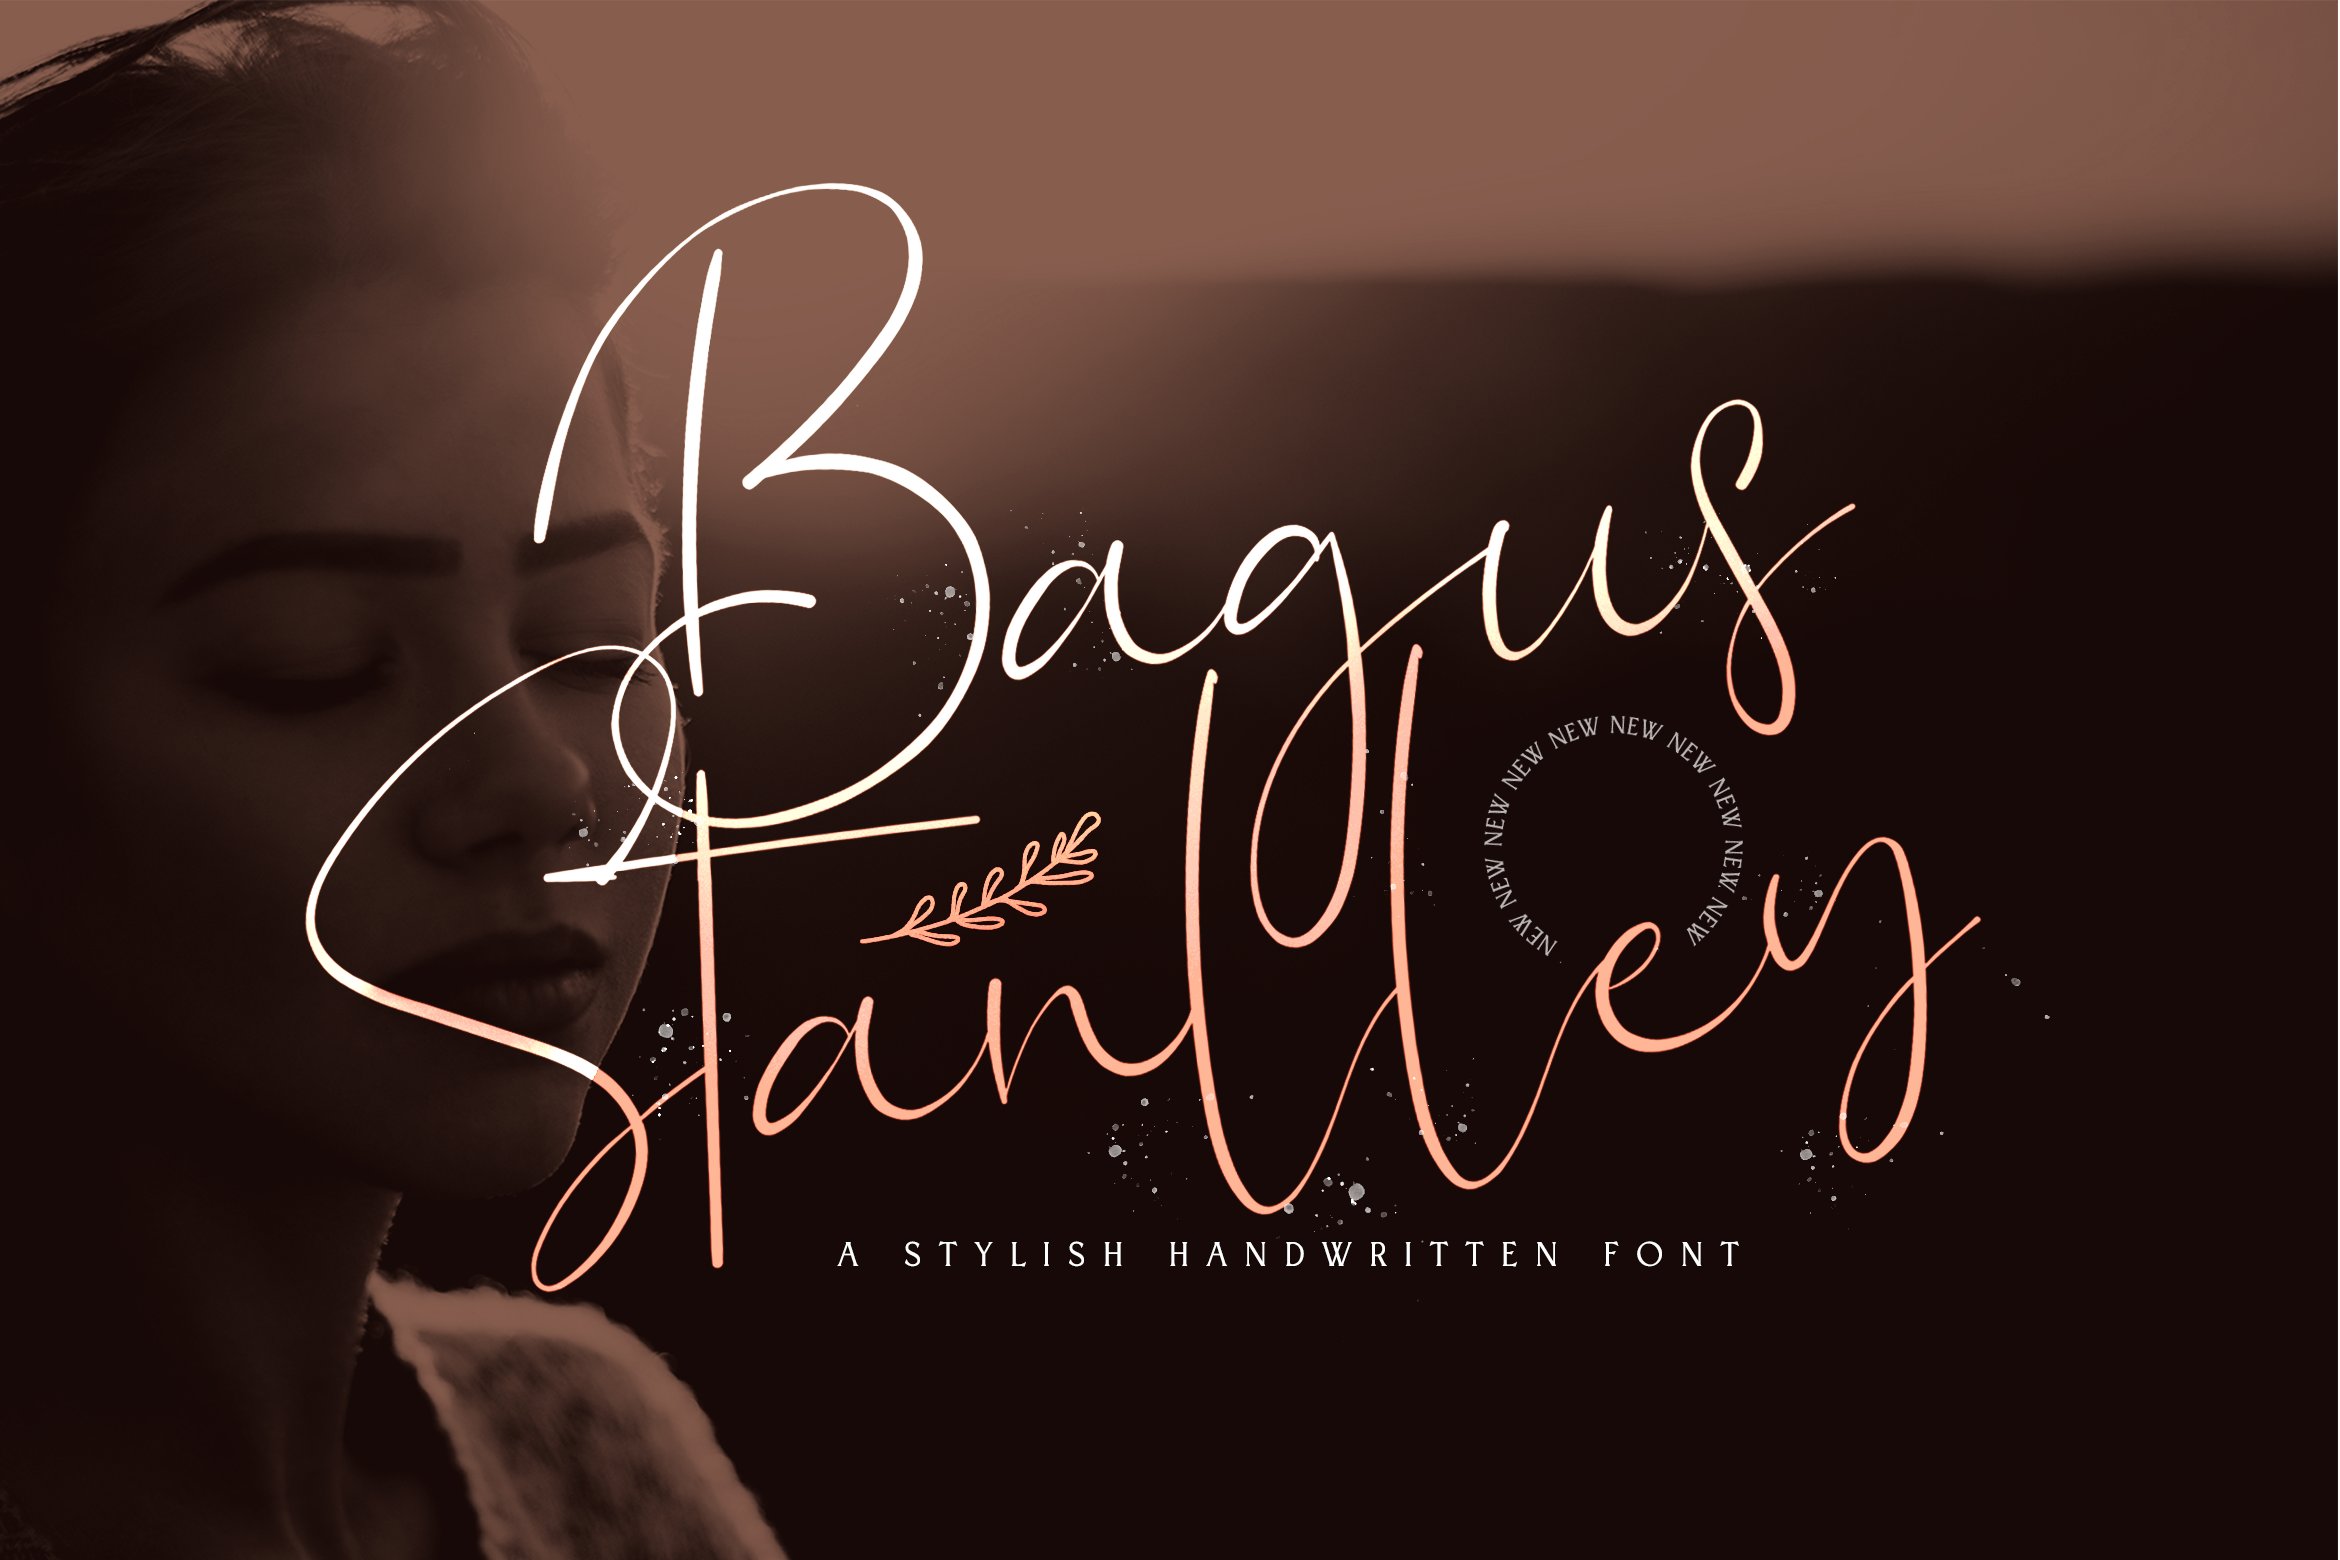 Bagus Stanlley - Stylish Script Font cover image.